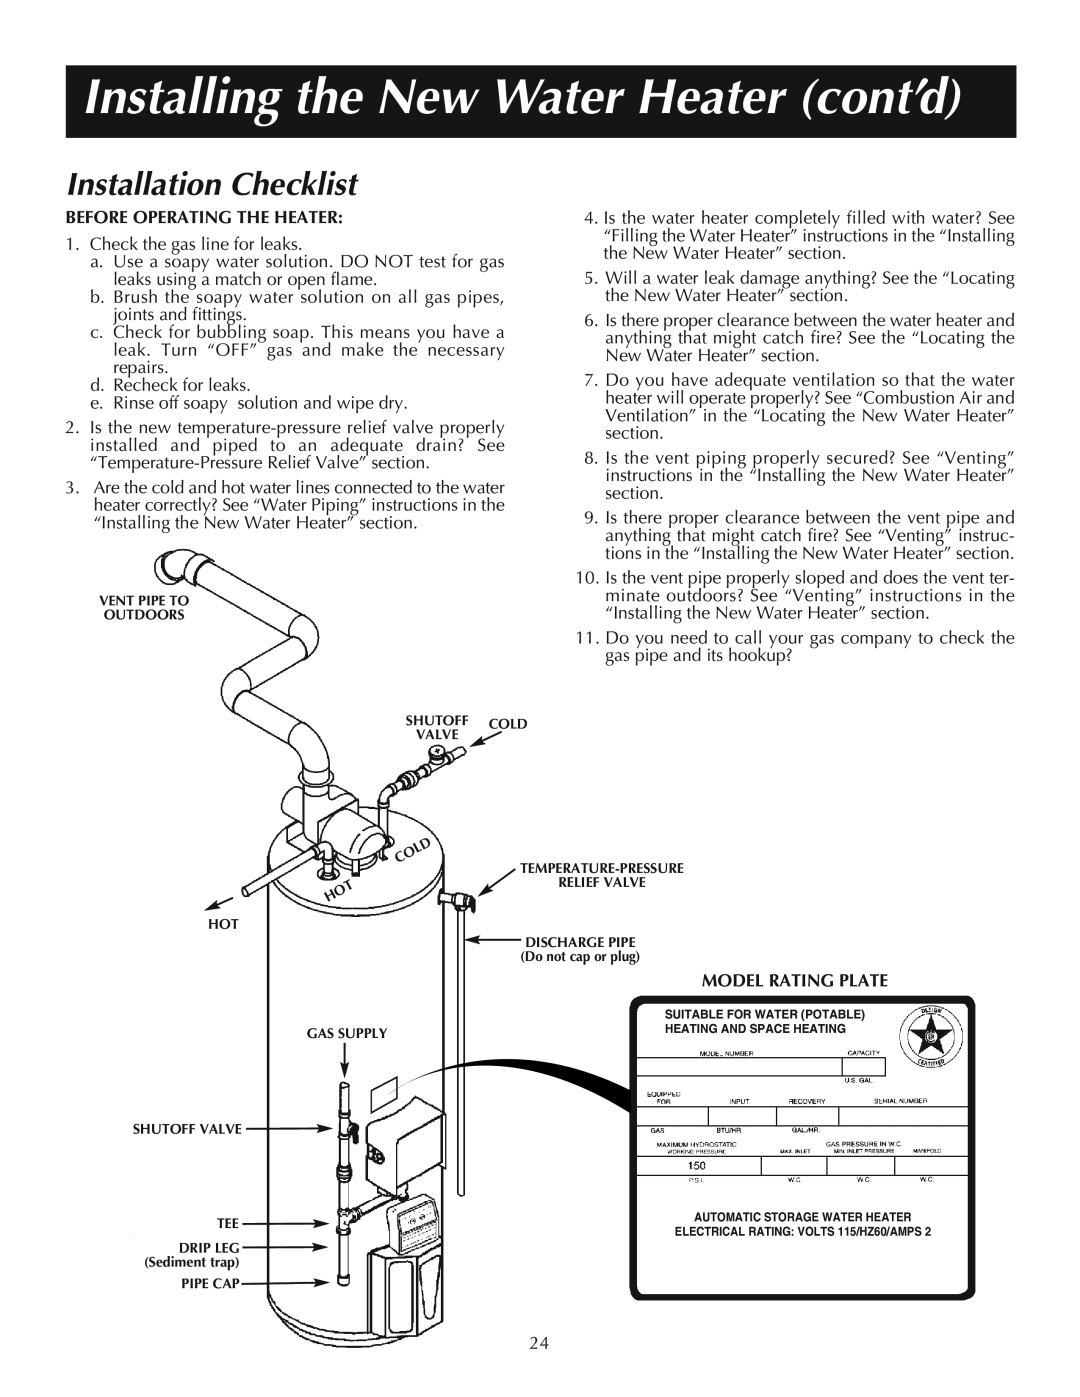 A.O. Smith Residential Power Vent Gas Water Heaters with Hot Surface Ignition Installation Checklist, Model Rating Plate 